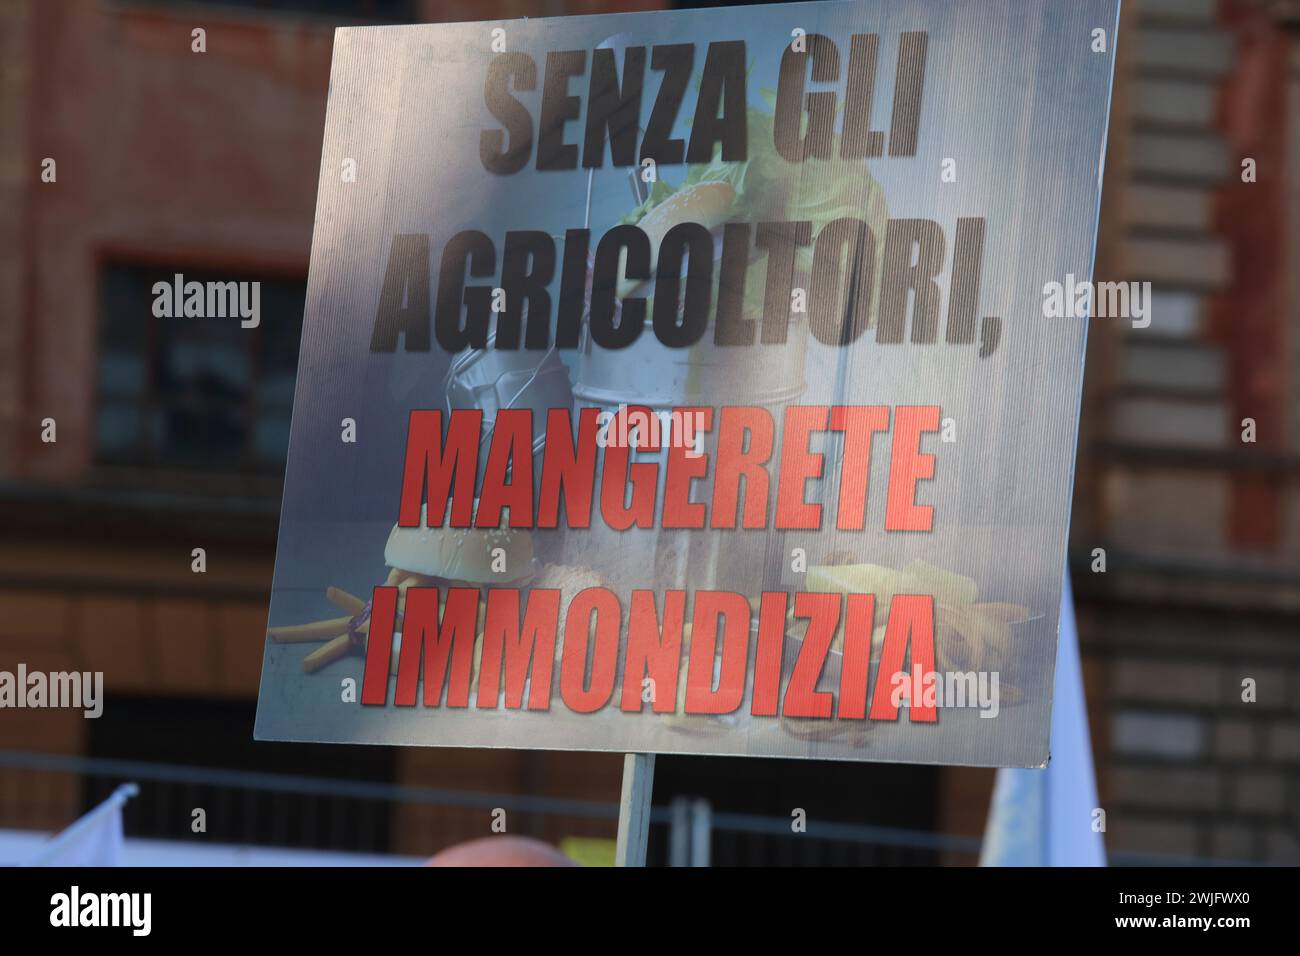 The farmers' protest in the Italian capital, the tractors arrived at the Circus Maximus. Rome, Italy. February 15, 2024. ANTONIO NARDELLI / ALAMY LIVE NEWS Stock Photo